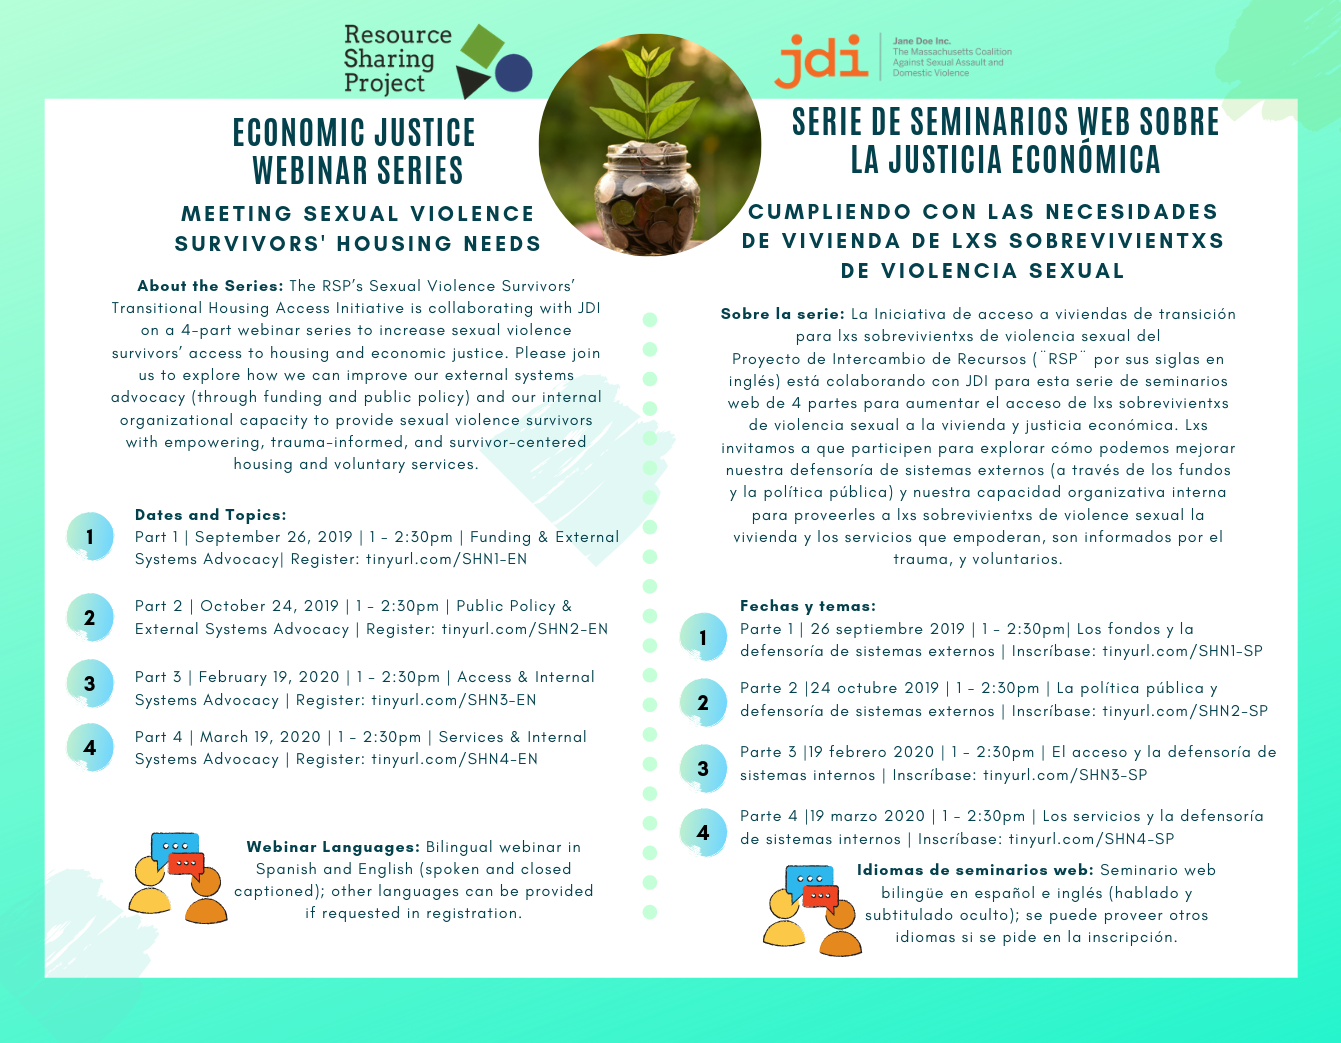 Flyer for Resource Sharing Project/Jane Doe Inc. Economic Justice Webinar series. Text included below in English and Spanish.